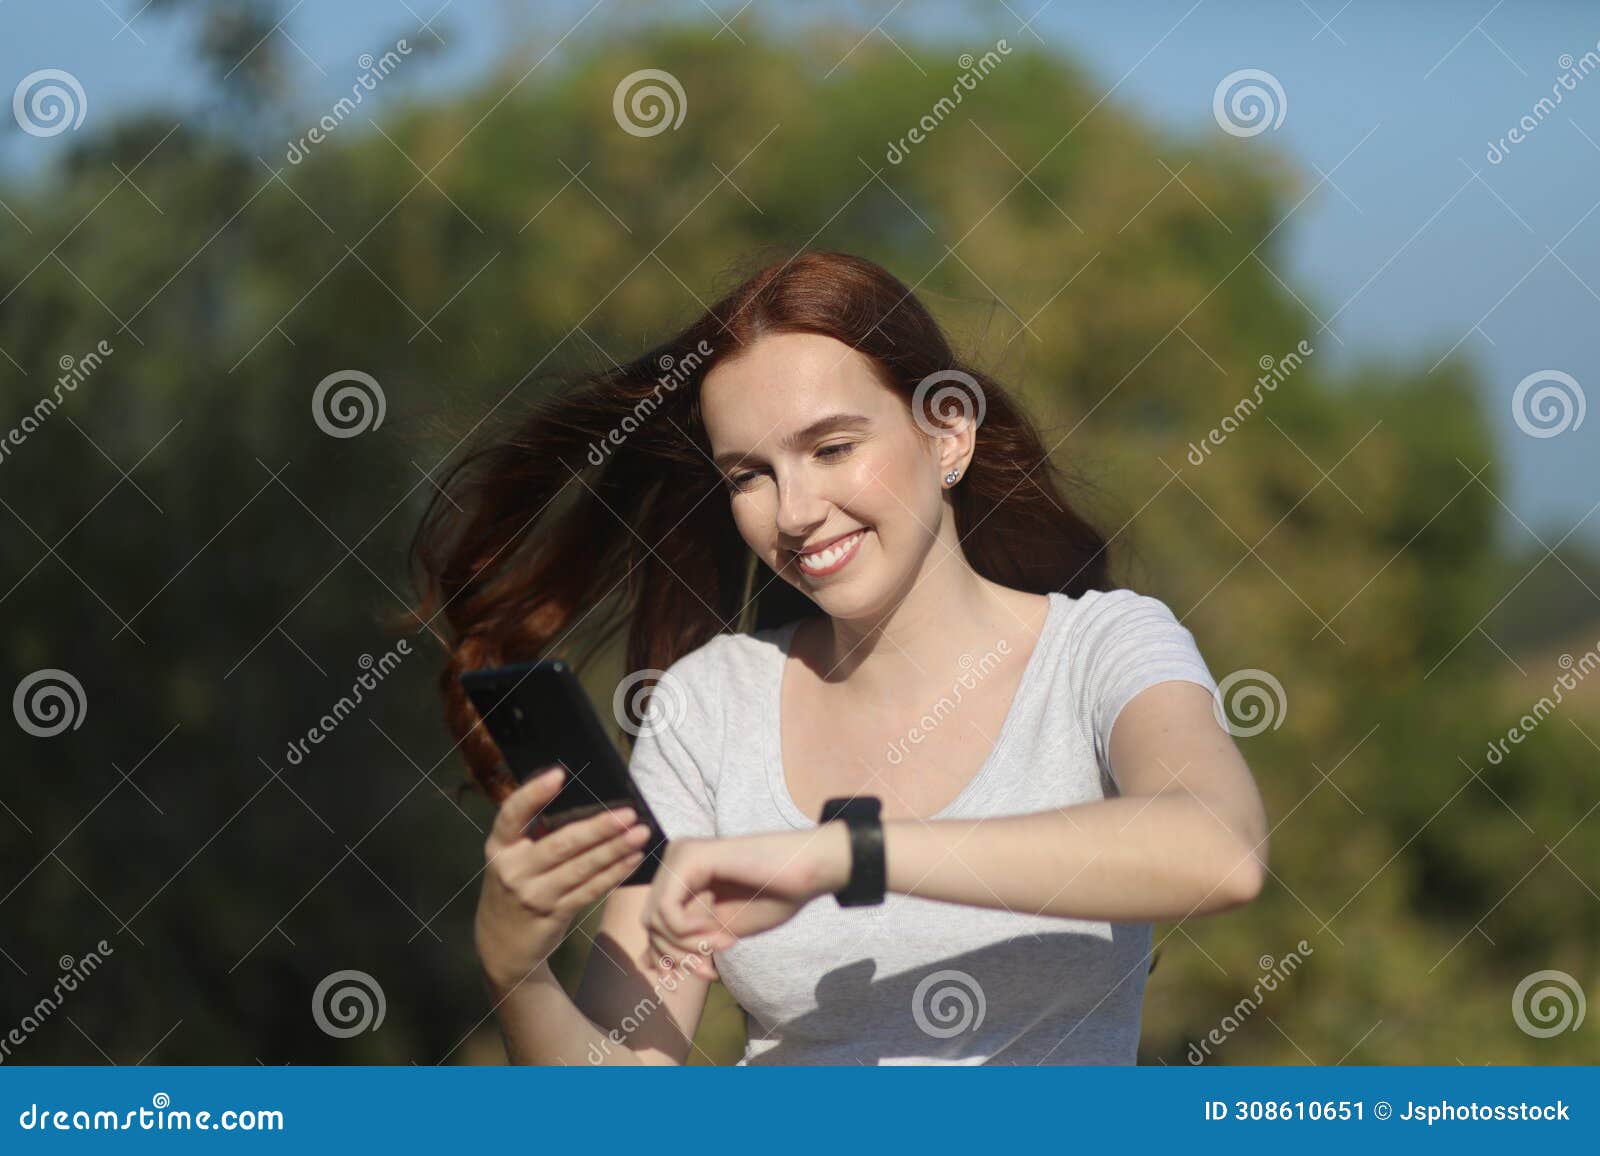 happy woman using a smartphone and a watch